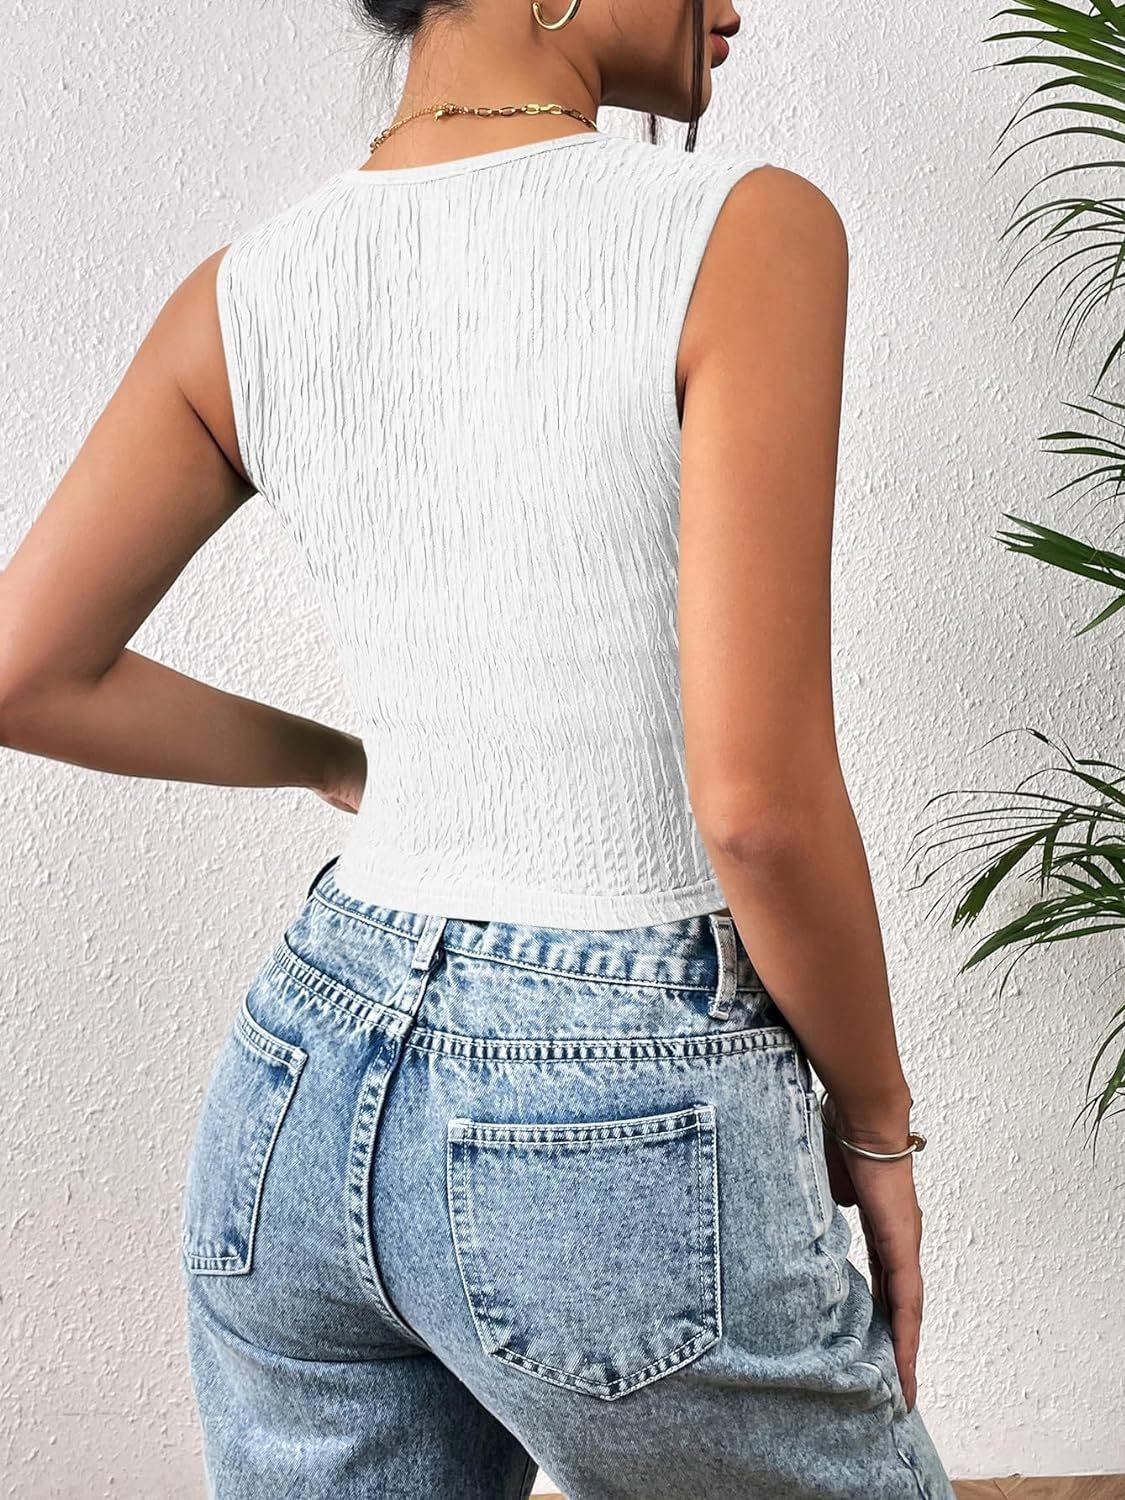 a woman wearing high waist jeans and a white top